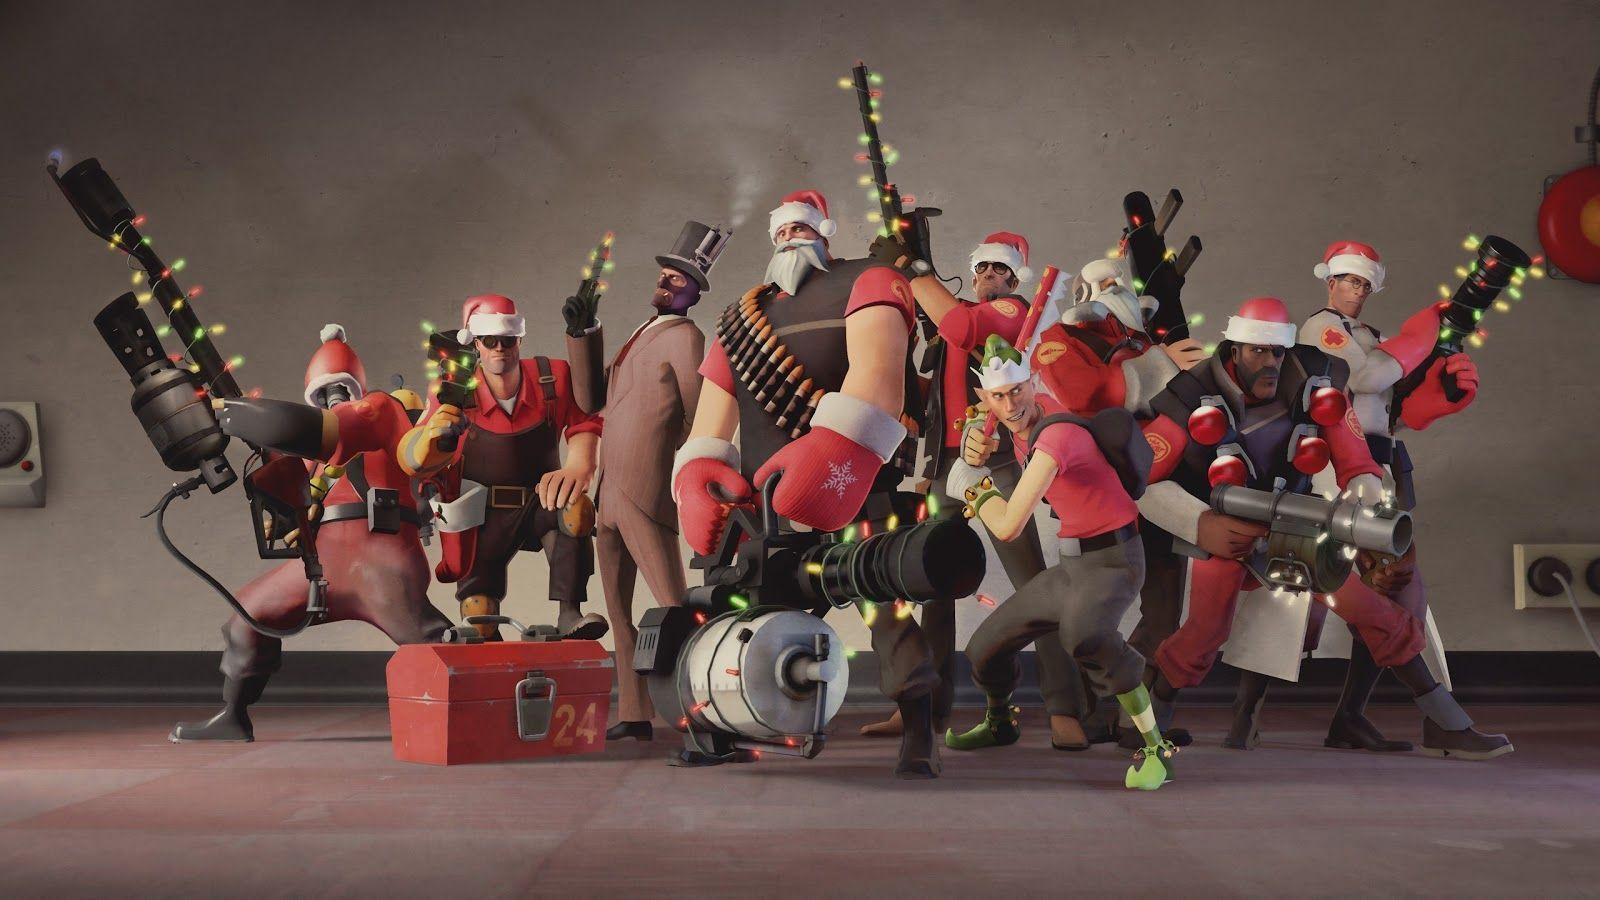 Awesome Team Fortress Image Team Fortress Wallpaper. HD Wallpaper